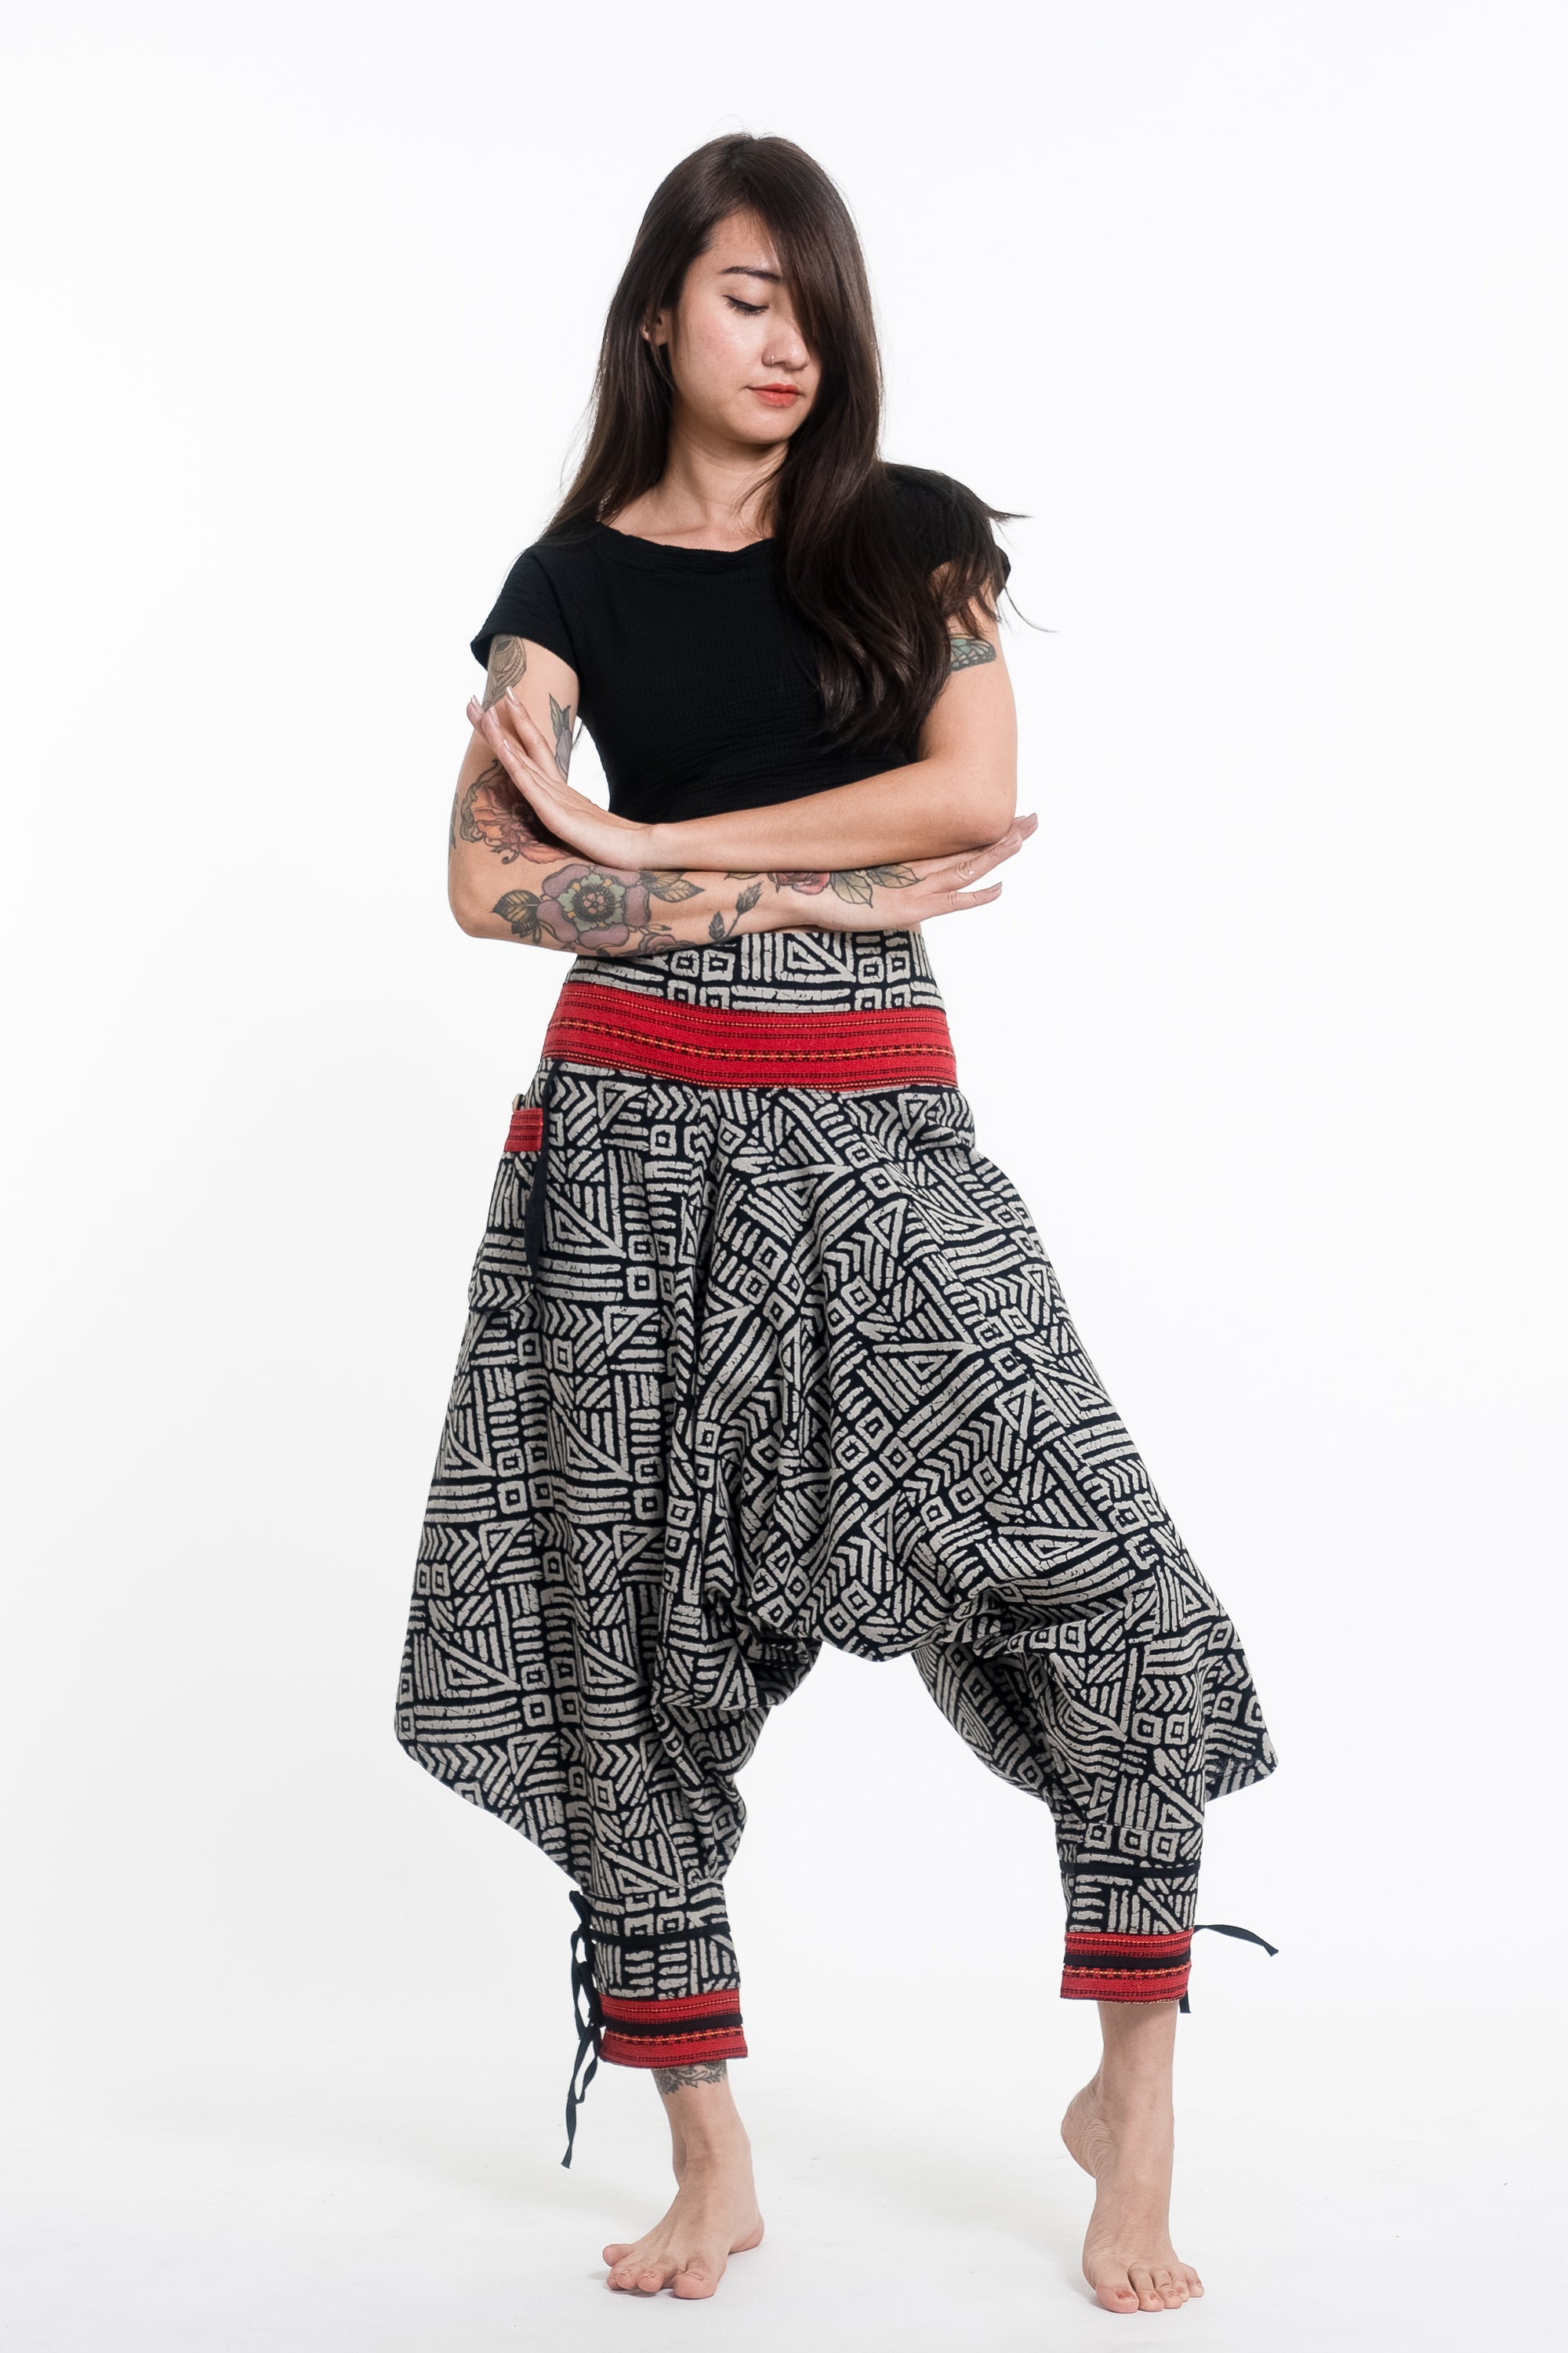 Woven Prints Thai Hill Tribe Fabric Women's Harem Pants with Ankle Str